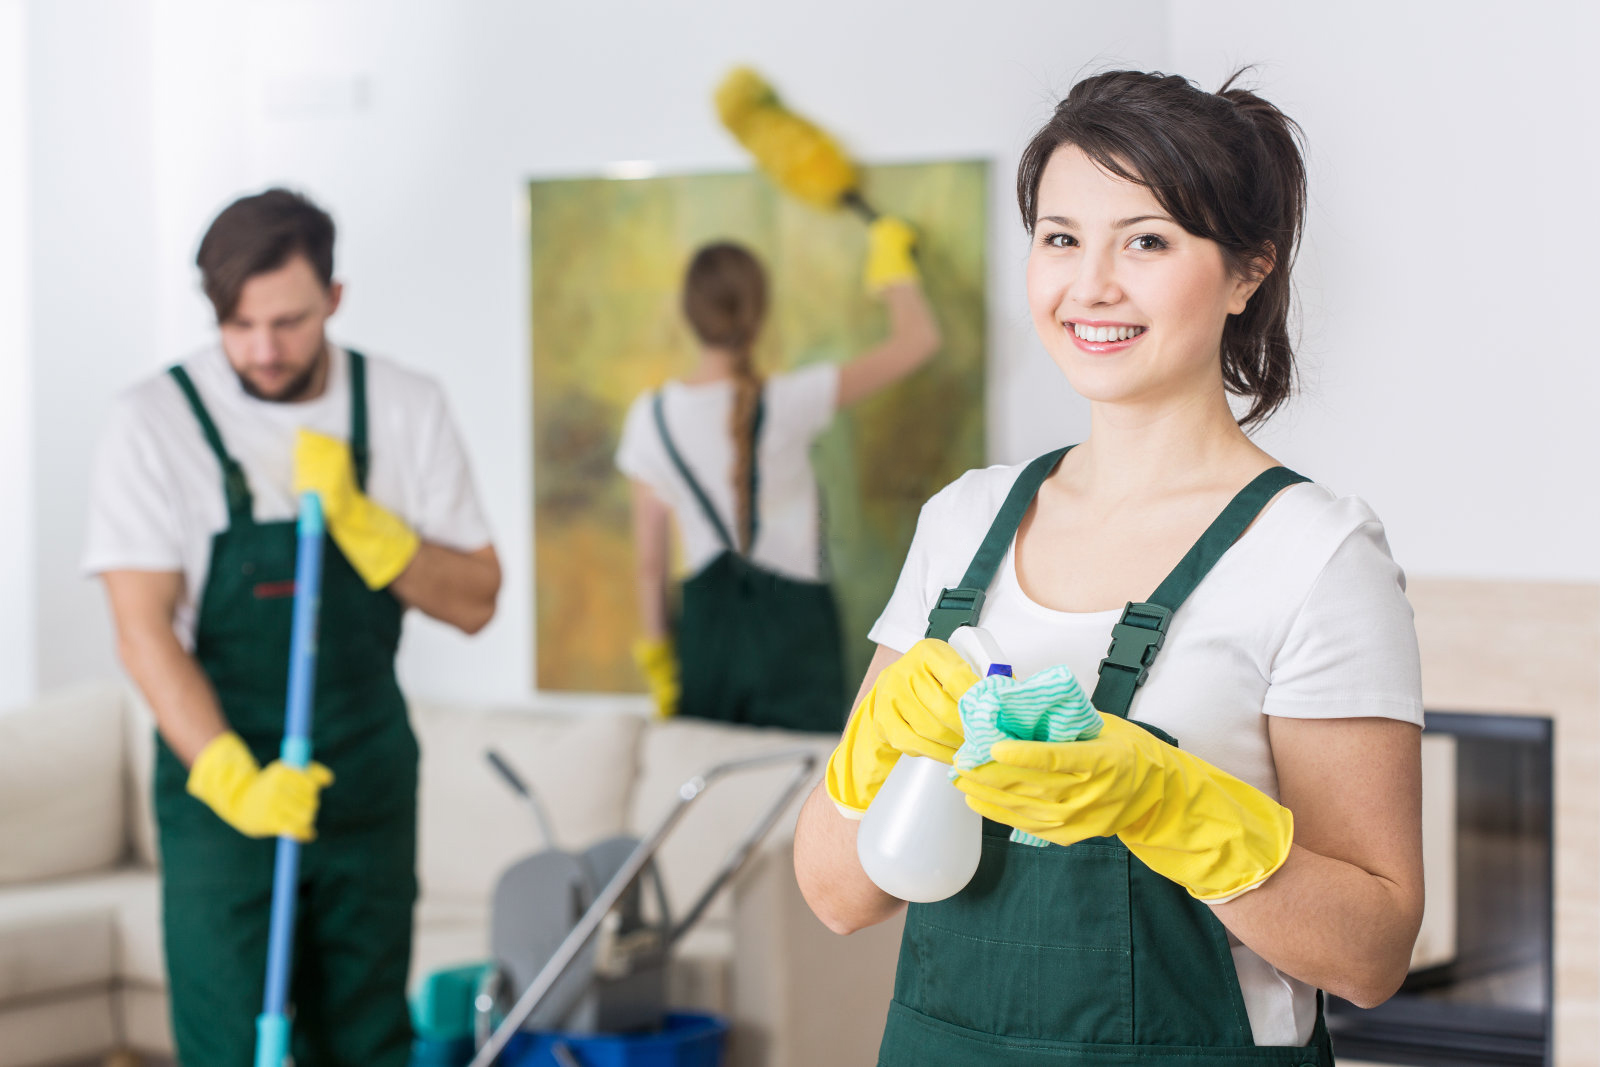 Definition of Cleaning, Disinfection and Sterilization in cleaning service